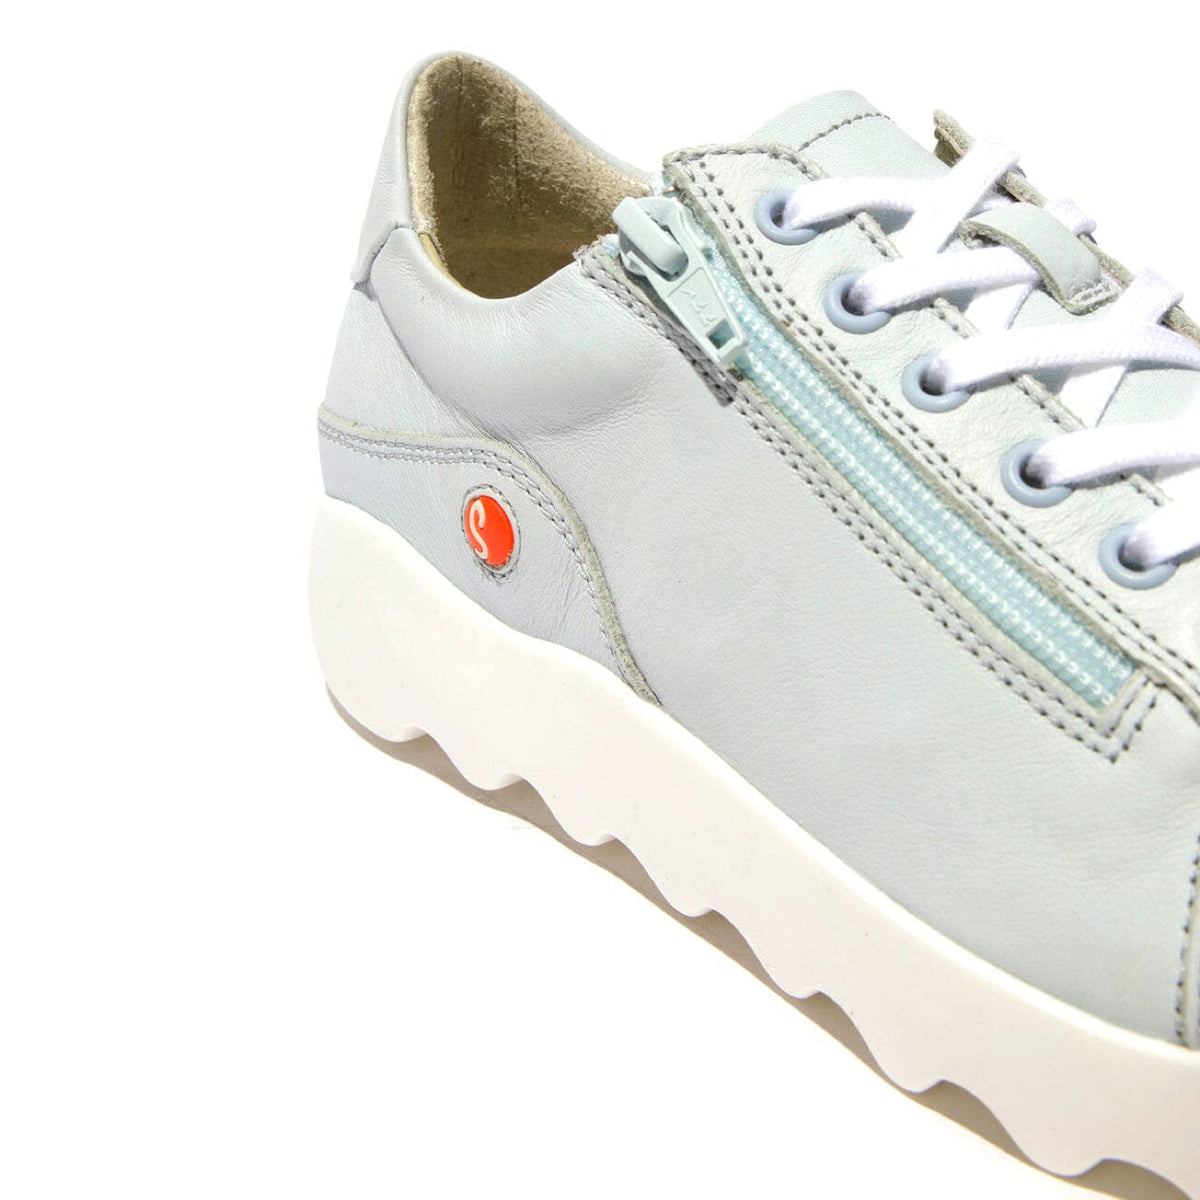 Softinos, Whiz719, Laceup Shoe, Smooth Leather, Light Blue Shoes Softinos 